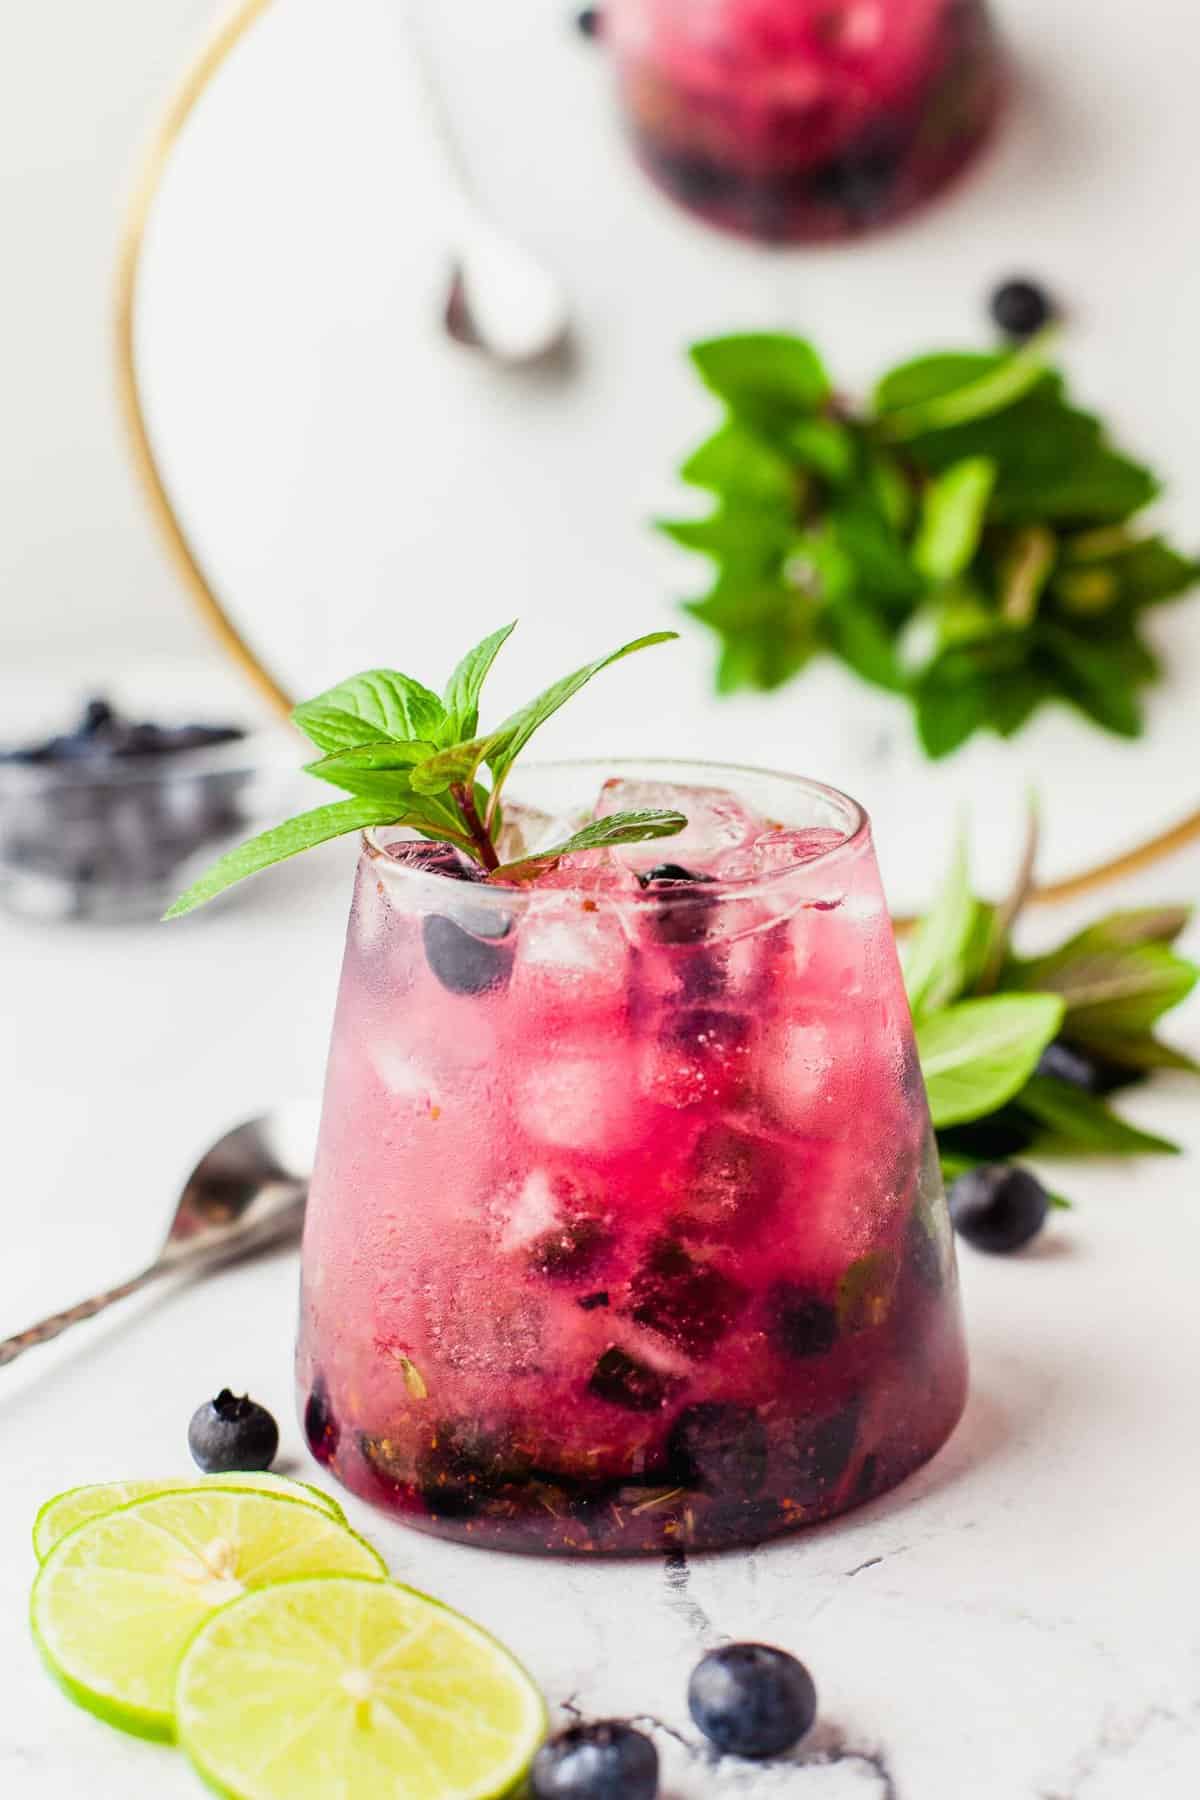 Blueberry mojito garnished with sprig of mint leaves